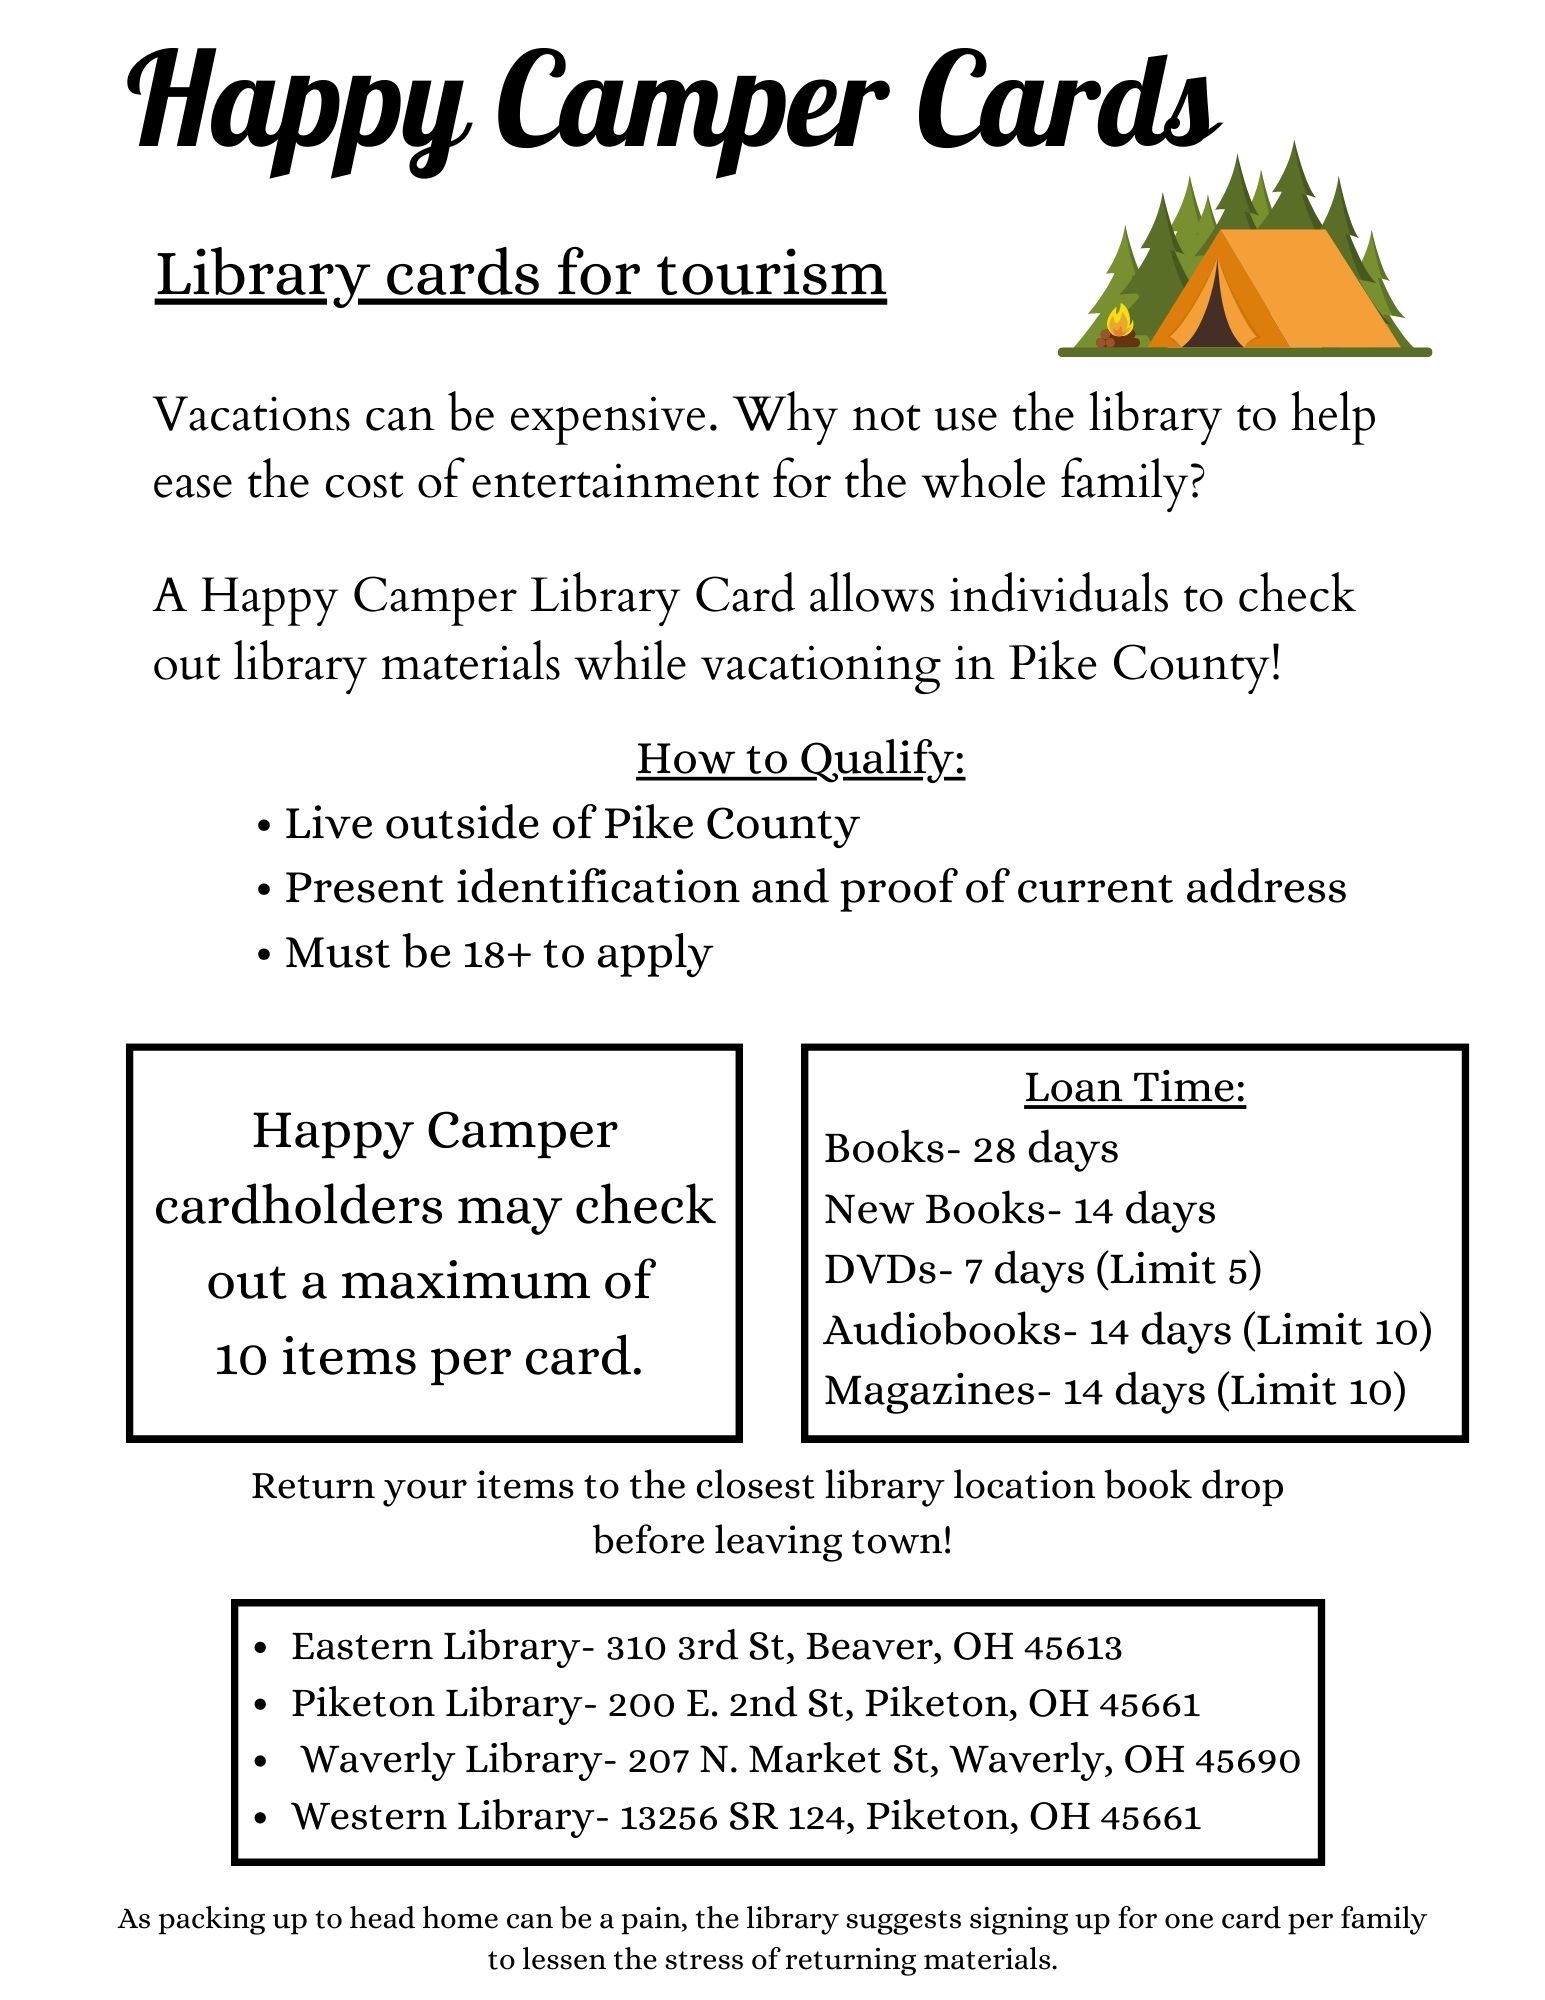 Happy Camper Cards- Library Cards for Tourism  Vacations can be expensive. Why not use the library to help ease the cost of entertainment for the whole family?  A Happy Camper Library Card allows individuals to check out library materials while vacationing in Pike County!   How to Qualify: •	Live outside of Pike County  •	Present identification and proof of current address •	Must be 18+ to apply  Happy Camper cardholders may check out a maximum of 10 items per card. Items check out for the following loan time:  Books- 28 days  New Books- 14 days  DVDs- 7 days (Limit 5) Audiobooks- 14 days (Limit 10) Magazines- 14 days (Limit 10)  Return your items to the closest library location book drop before leaving town!  	Eastern Library- 310 3rd St, Beaver, OH 45613 	Piketon Library- 200 E. 2nd St, Piketon, OH 45661 	Waverly Library- 207 N. Market St, Waverly, OH 45690 	Western Library- 13256 SR 124, Piketon, OH 45661  As packing up to head home can be a pain, the library suggests signing up for one card per family to lessen the stress of returning materials.